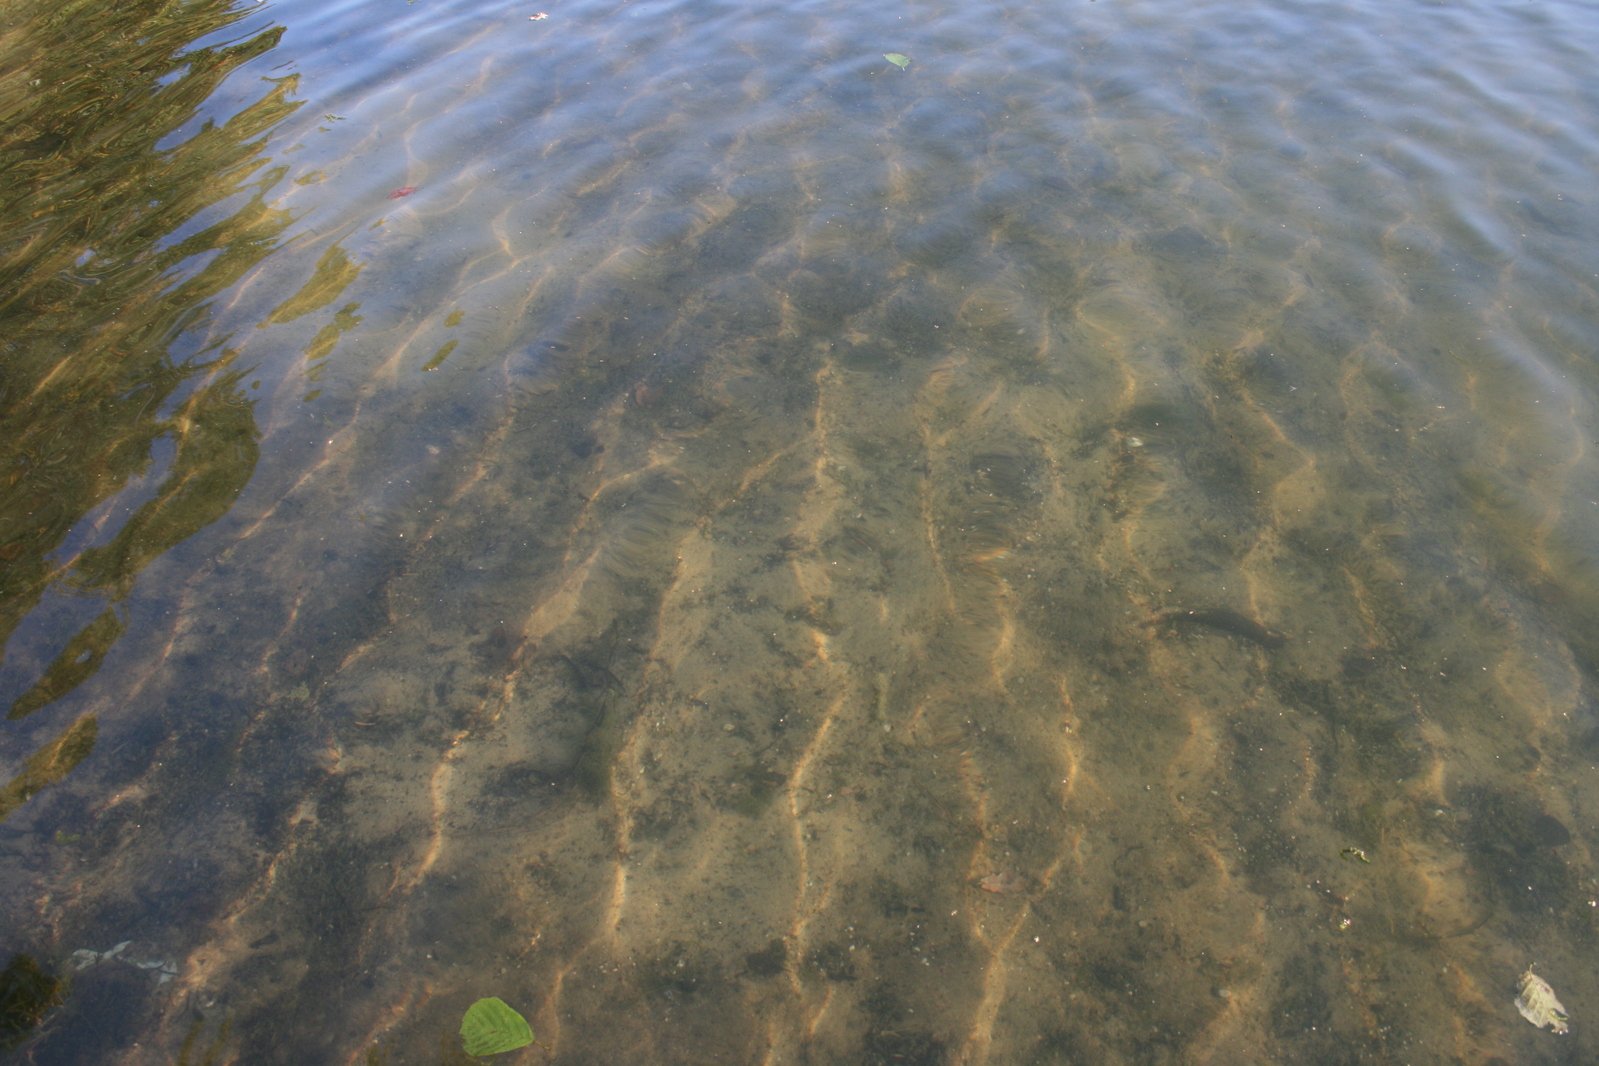 the water in a lake with shallow patches of sand and debris